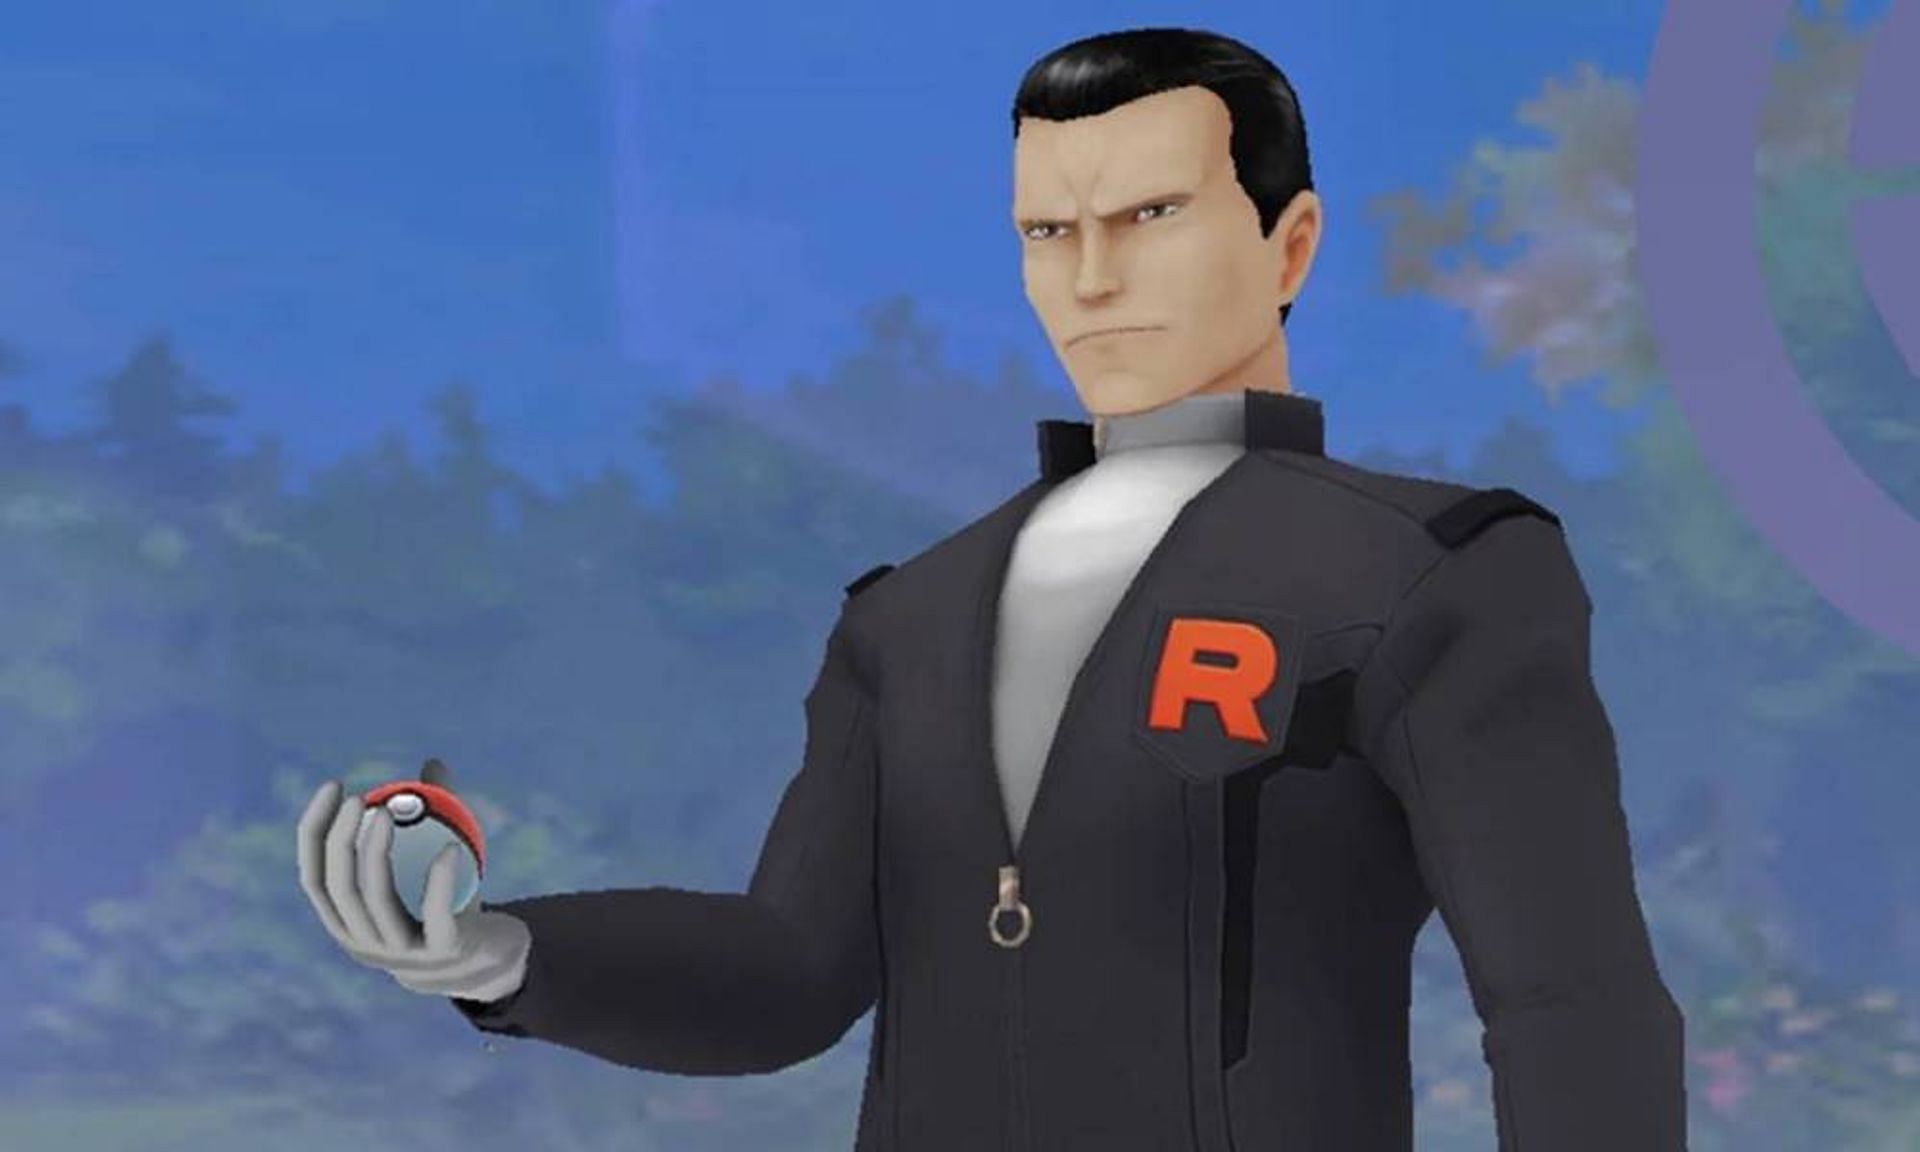 Giovanni as he appears in Pokemon GO (Image via Niantic)